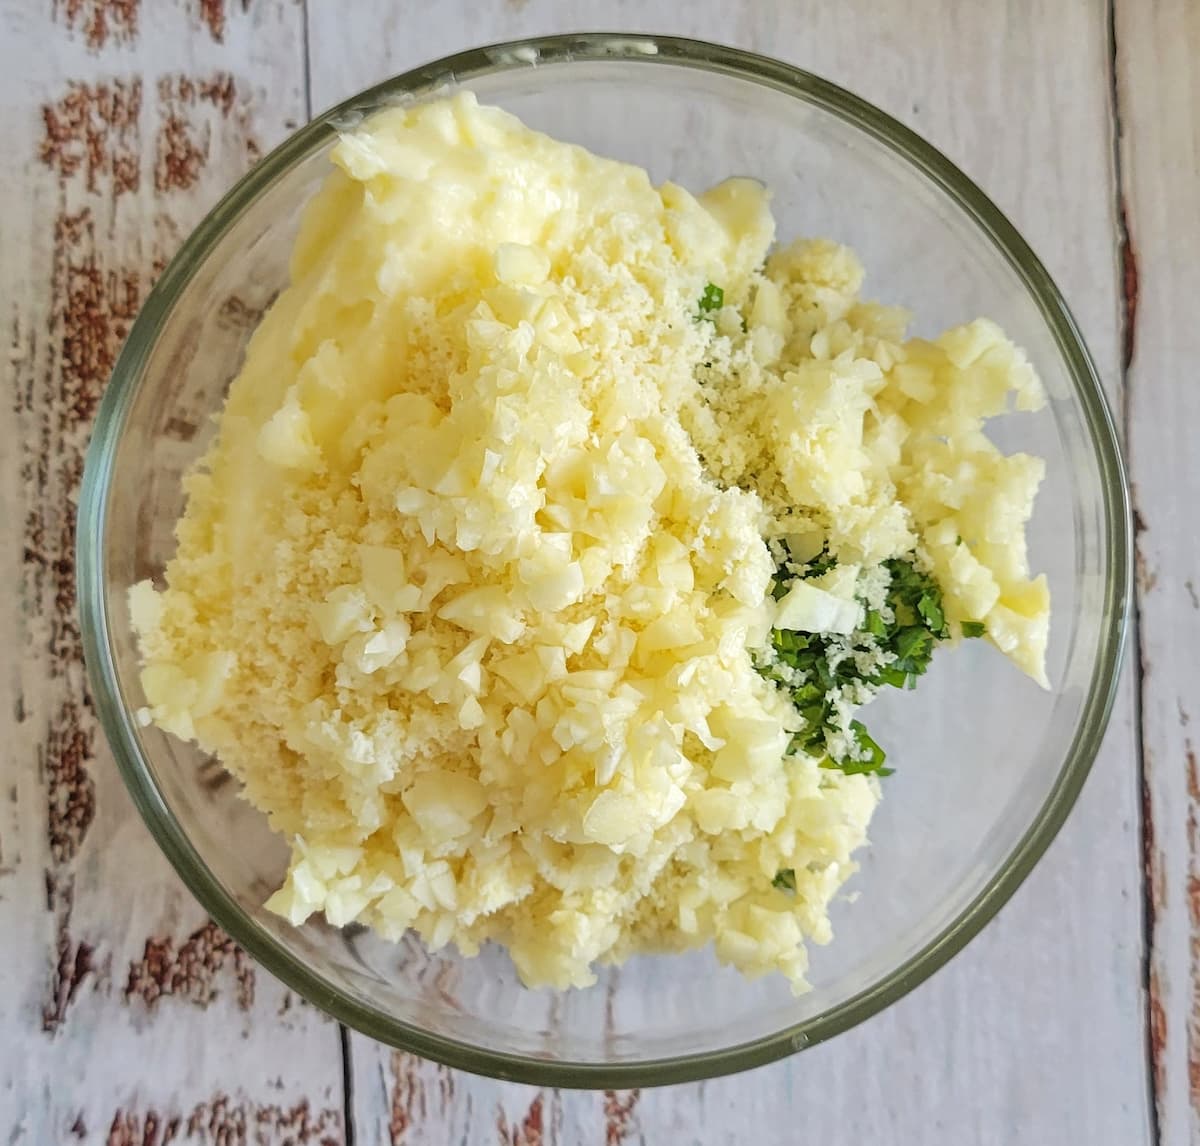 garlic, butter, parmesan cheese and herbs unmixed in a bowl